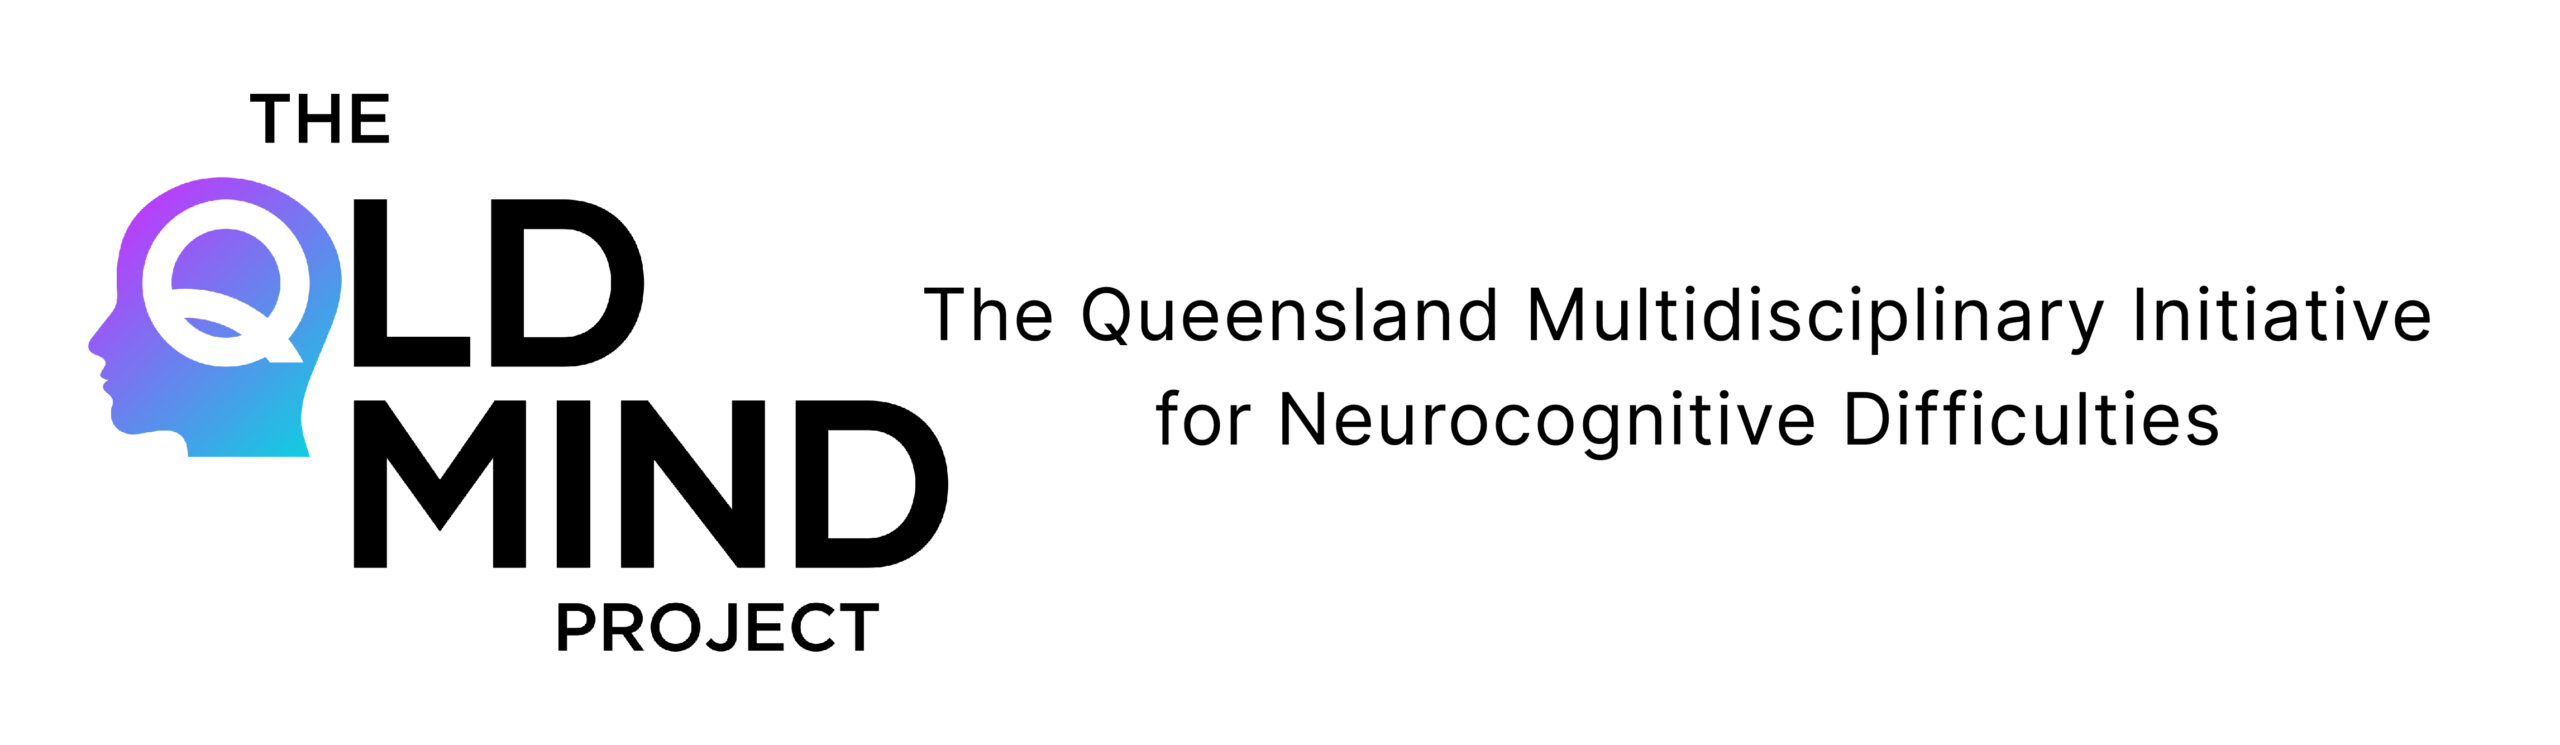 The QLD MIND Project